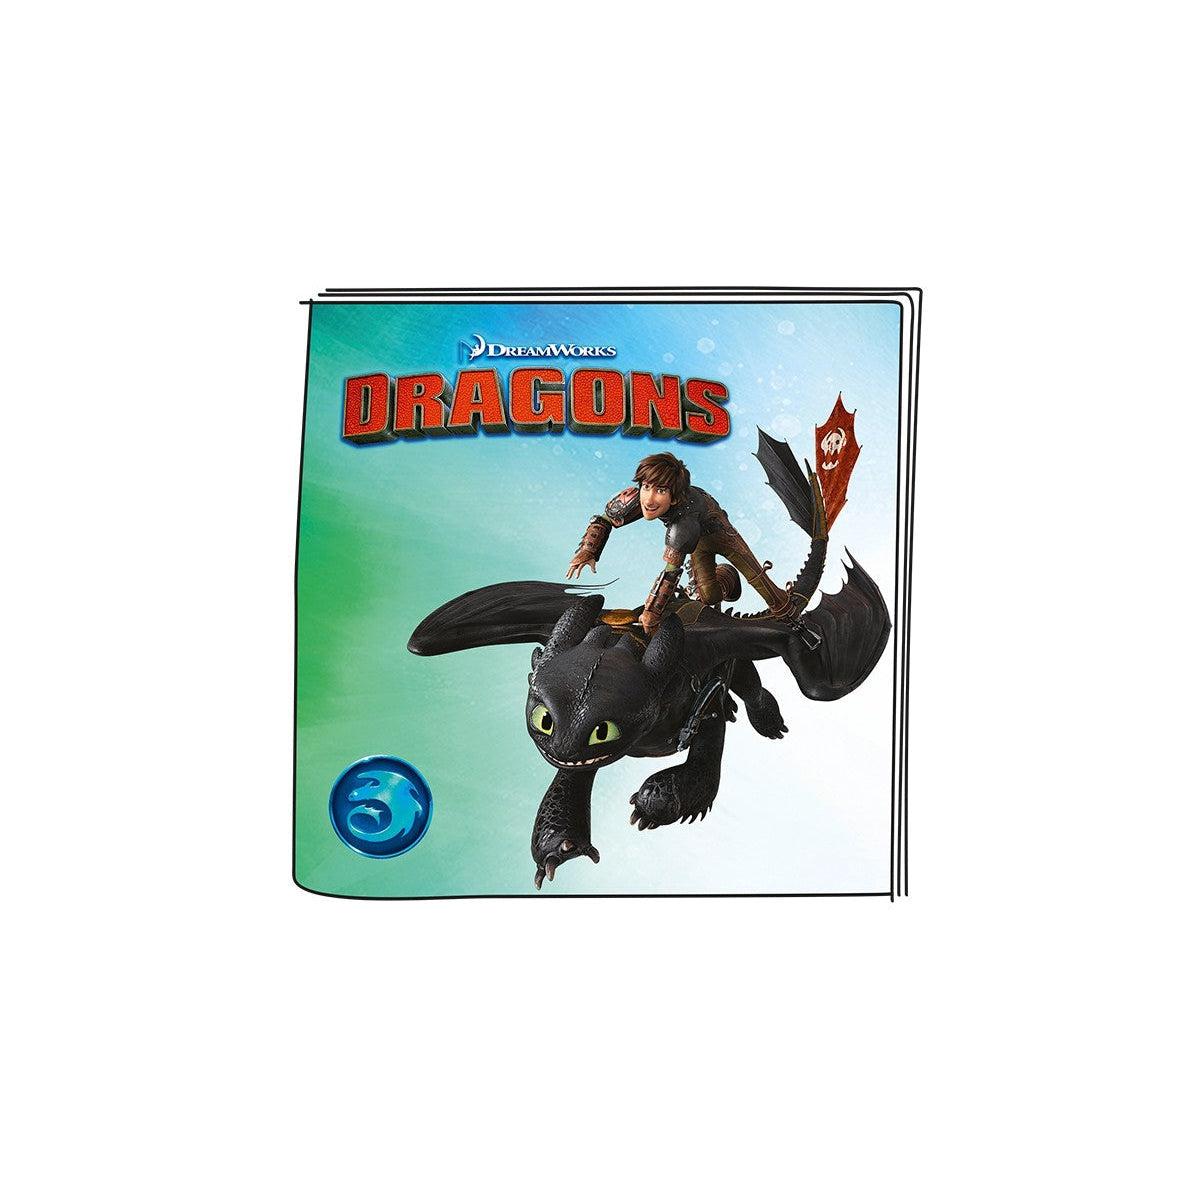 Tonies How to Train Your Dragon 1 - Audio Character for use with Toniebox Player